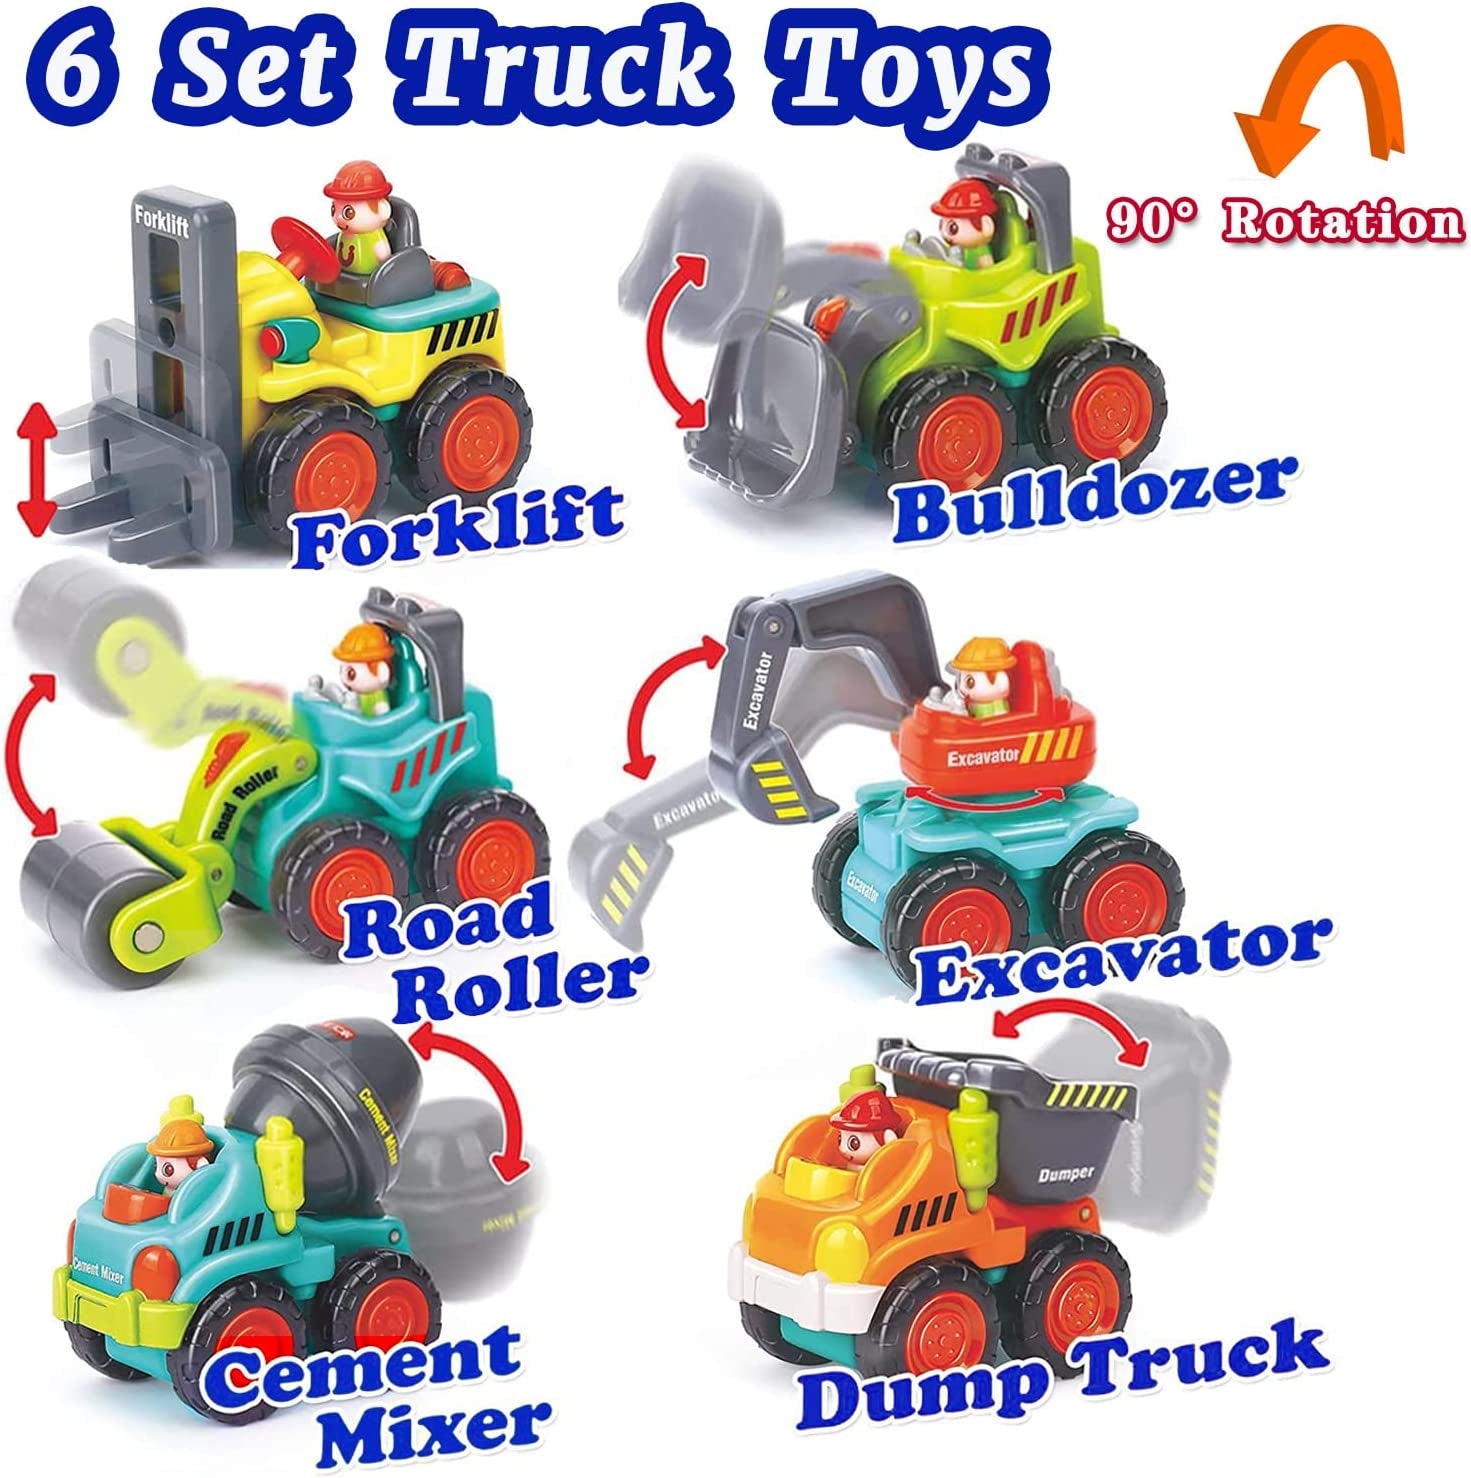 Mini Toddler Construction Vehicles Playsets - Dump Truck , Excavator, Bulldozer, Cement Mixer, Forklift, Road Roller, Construction Car Toys for 12 to 18 Months Old Boy